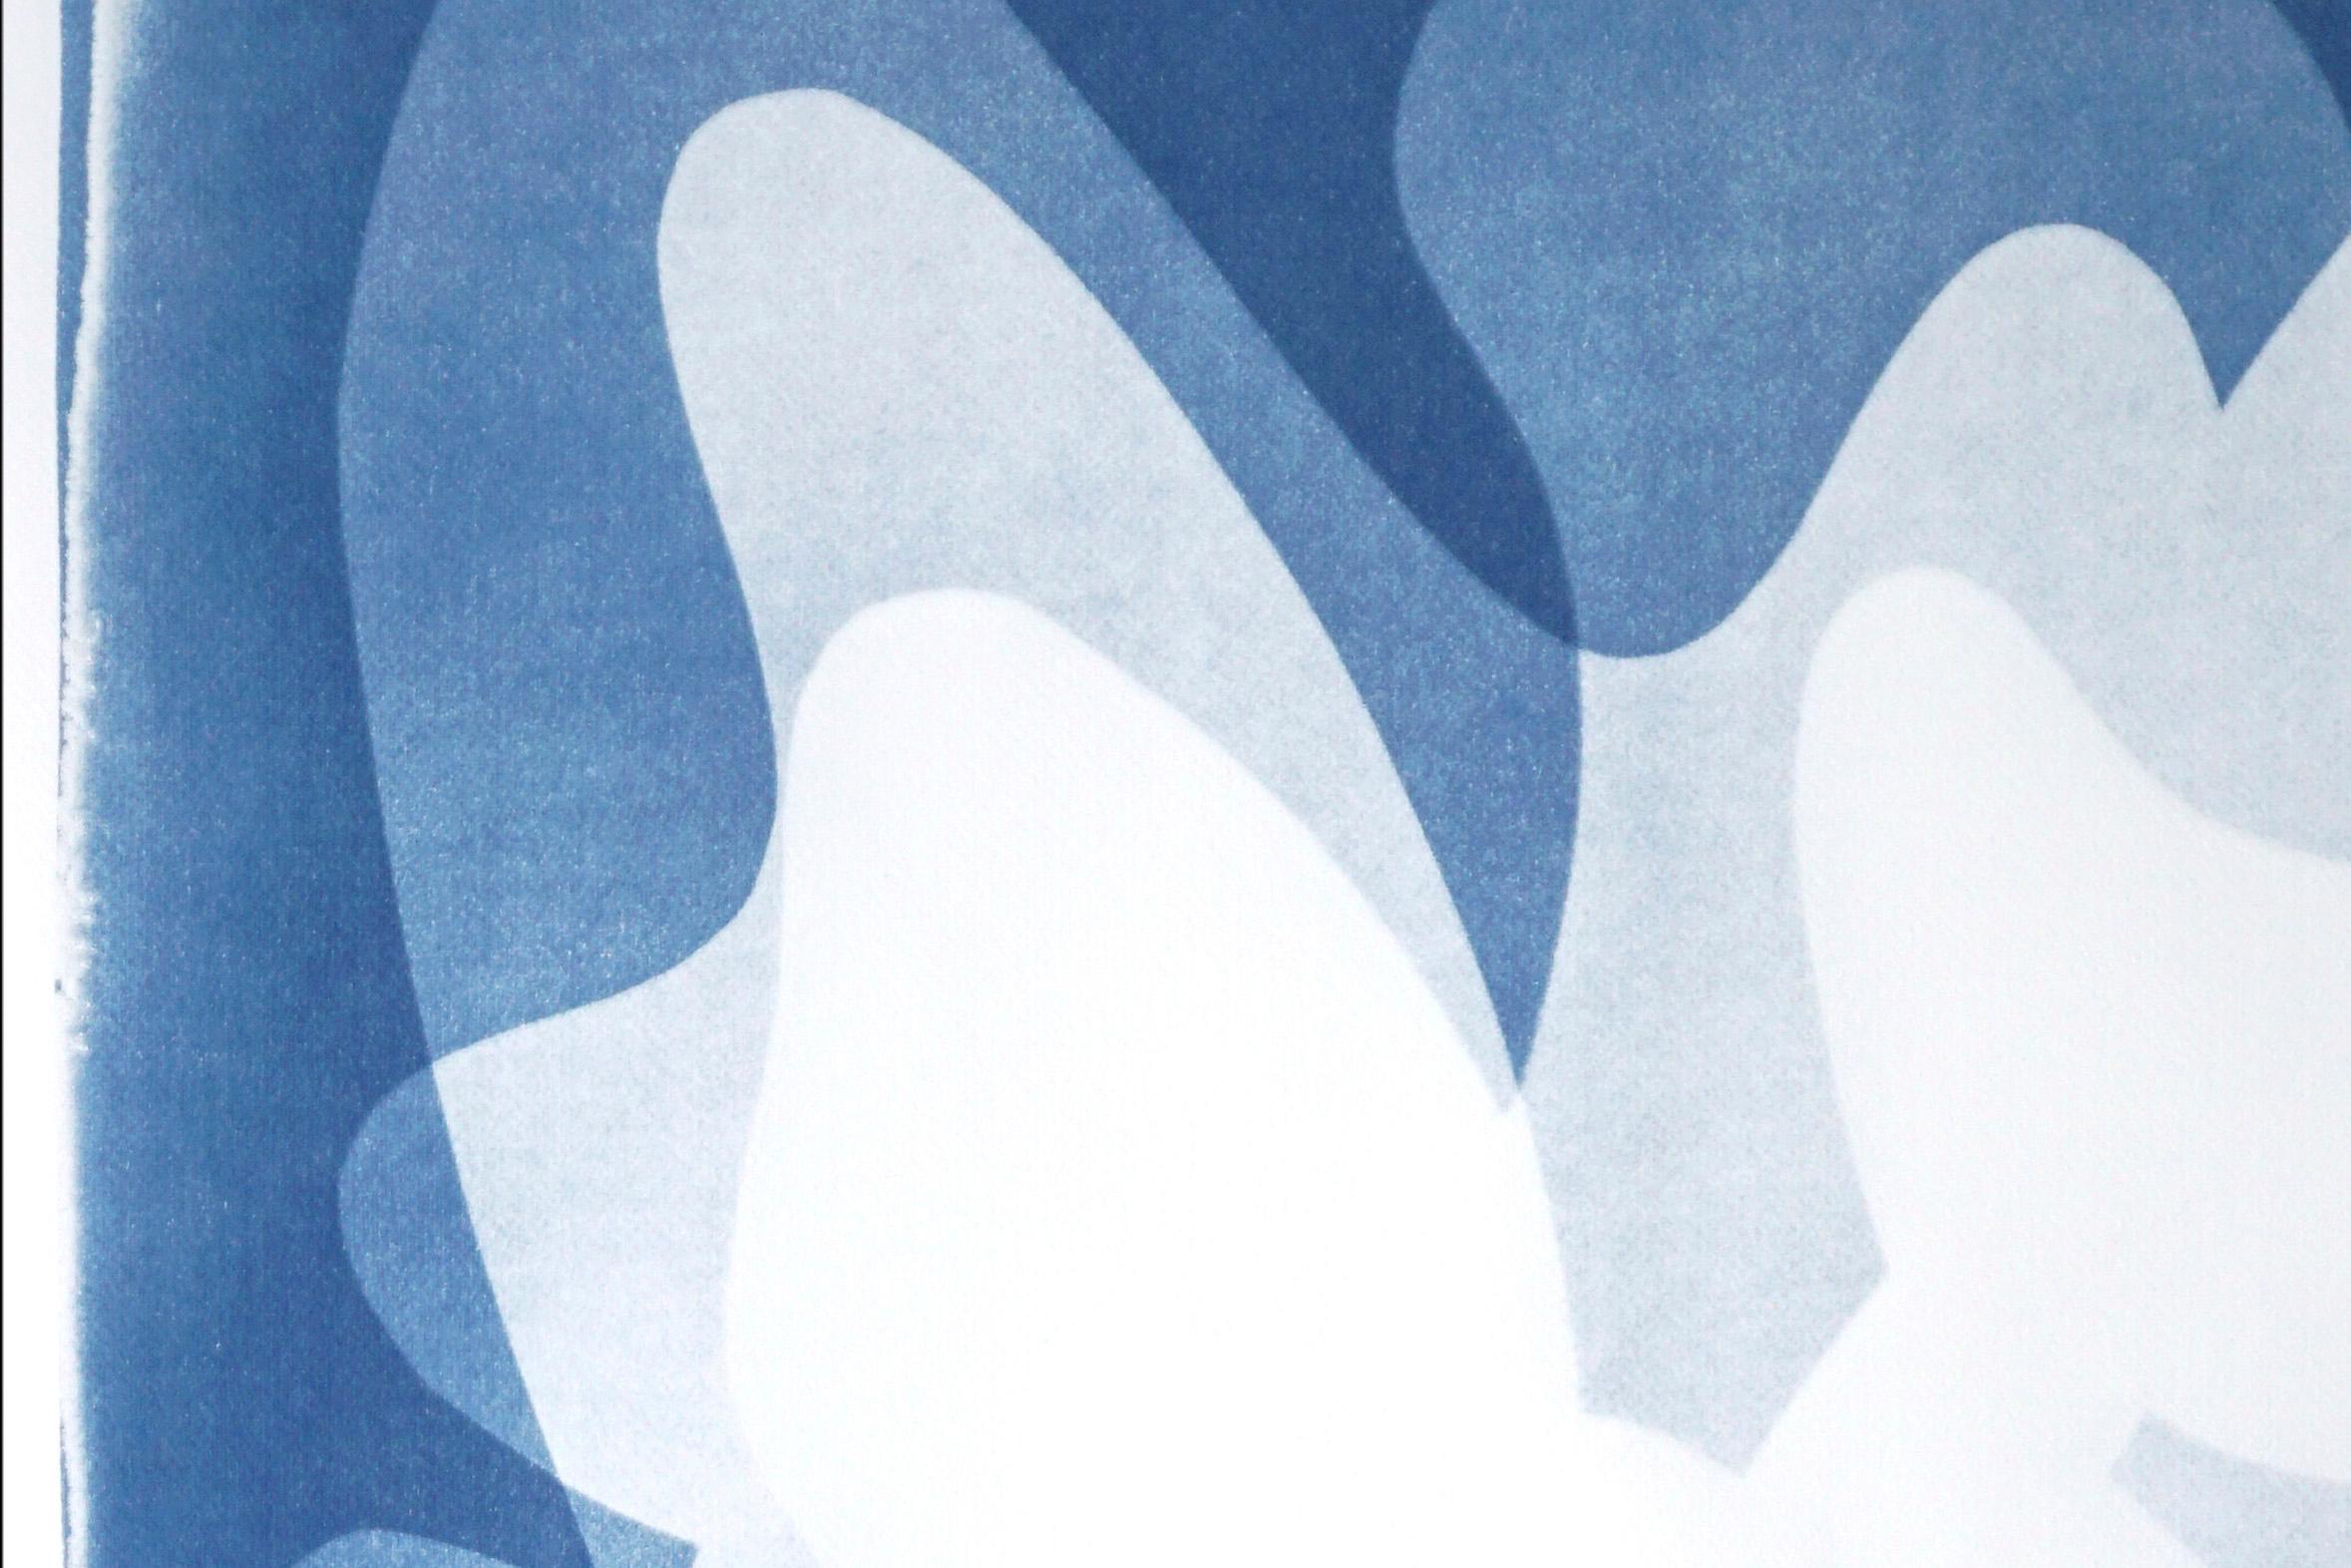 Blue Abstract Tulips, Vertical Flowers Shadows Blue & White, Handmade Botanical 2